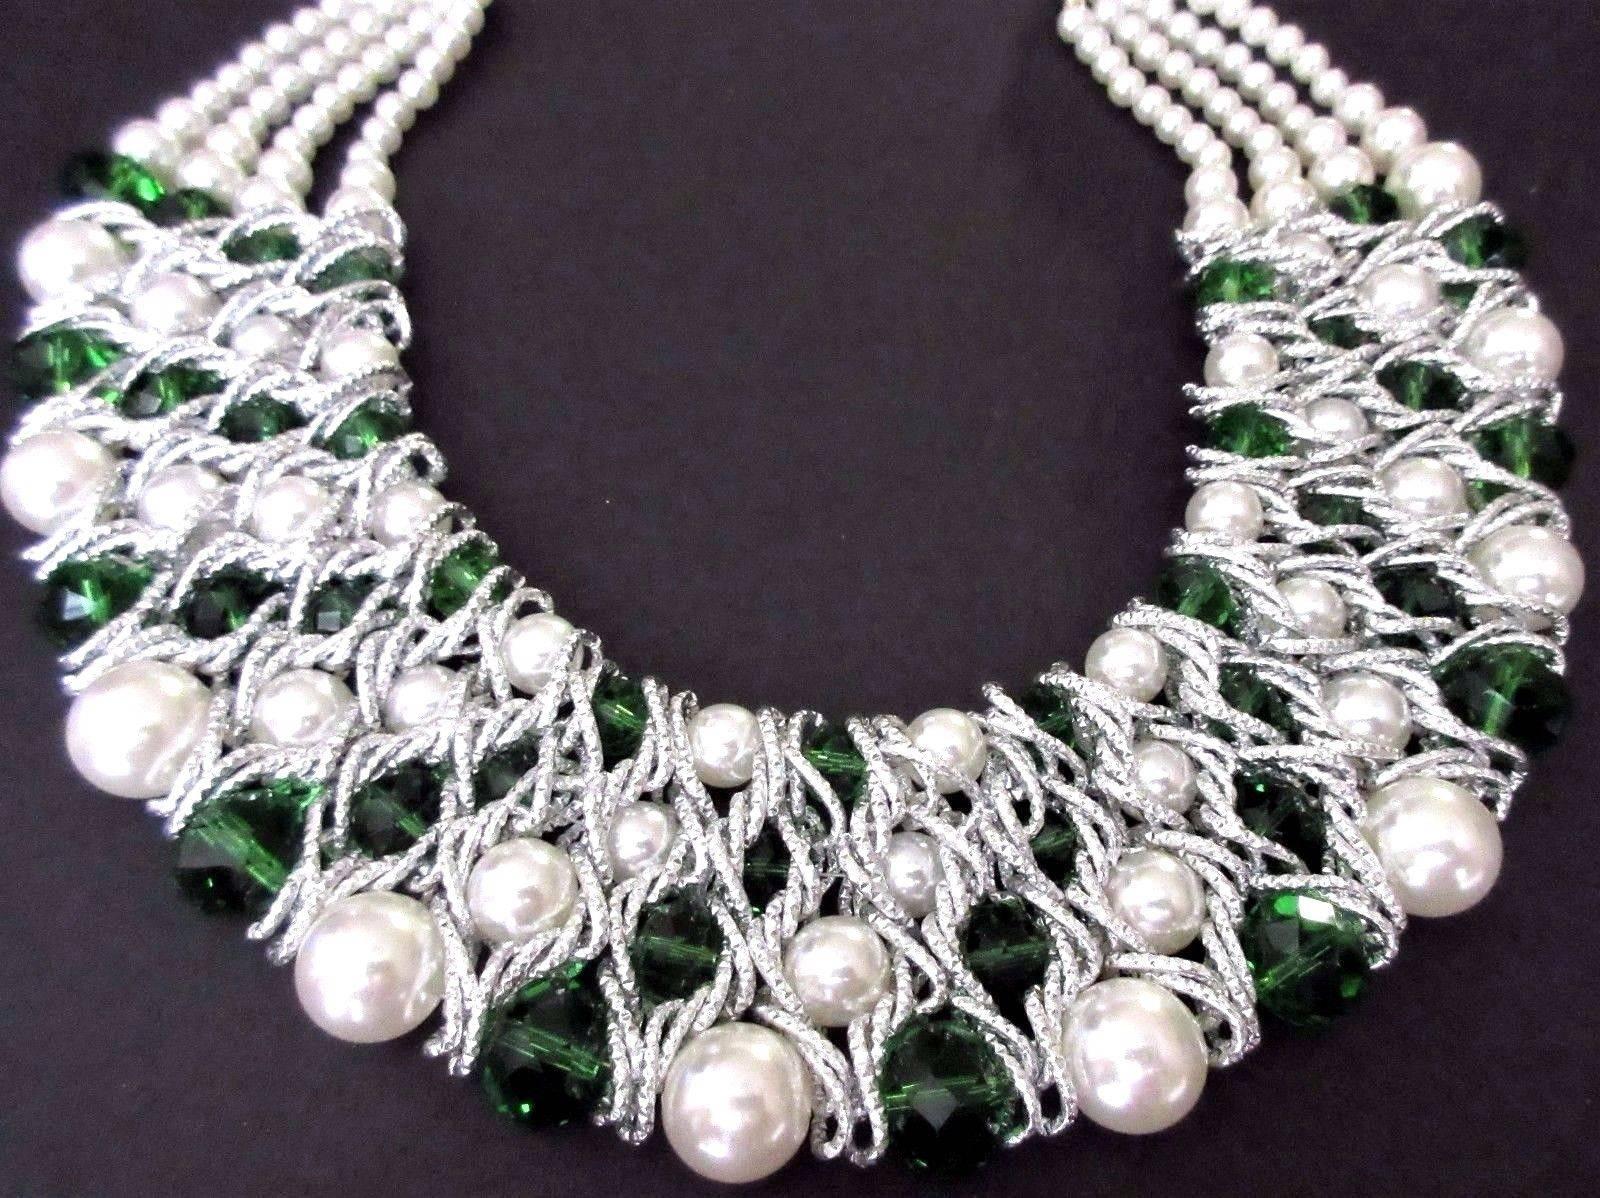 Stunning Faux Pearl, Emerald Green and Clear Crystal Caged Festive Stand-out Runway Necklace; Silver Tone; Add your own Chic Style and Pizzazz to any outfit! 
